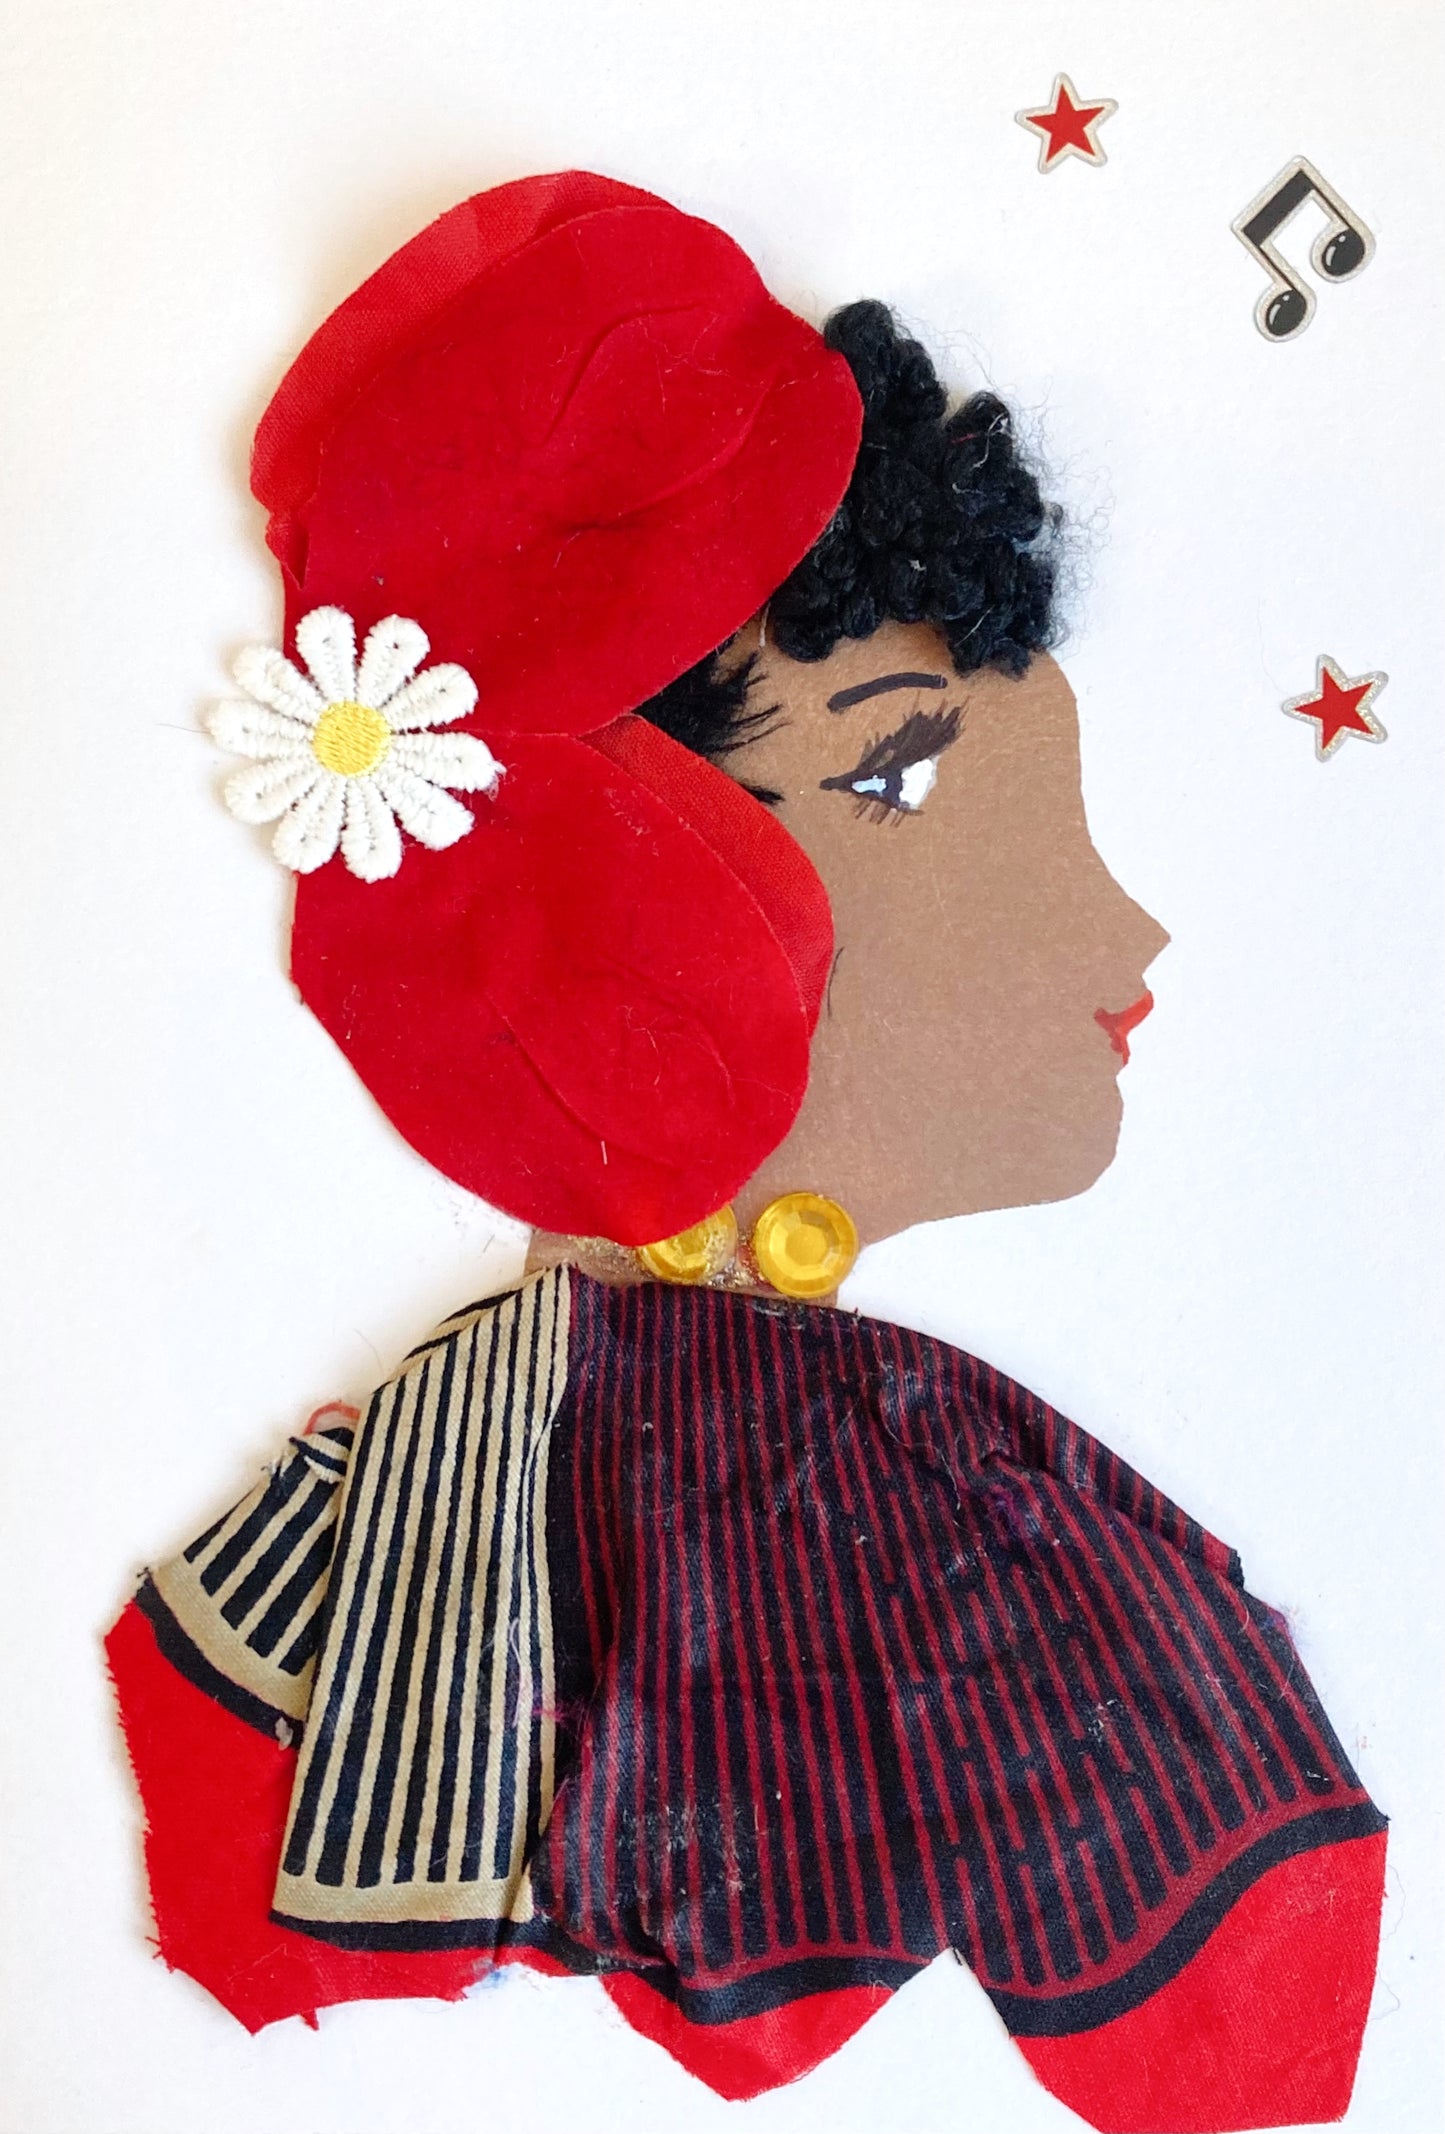 This card is of a woman given the name Davina. She wears a dress patterned with red, black, and white. Her necklace is yellow gemstones. In her black curly hair, she wears a flower petal headpiece which has a white daisy on it. In the background, there are music notes and stars in the background. 